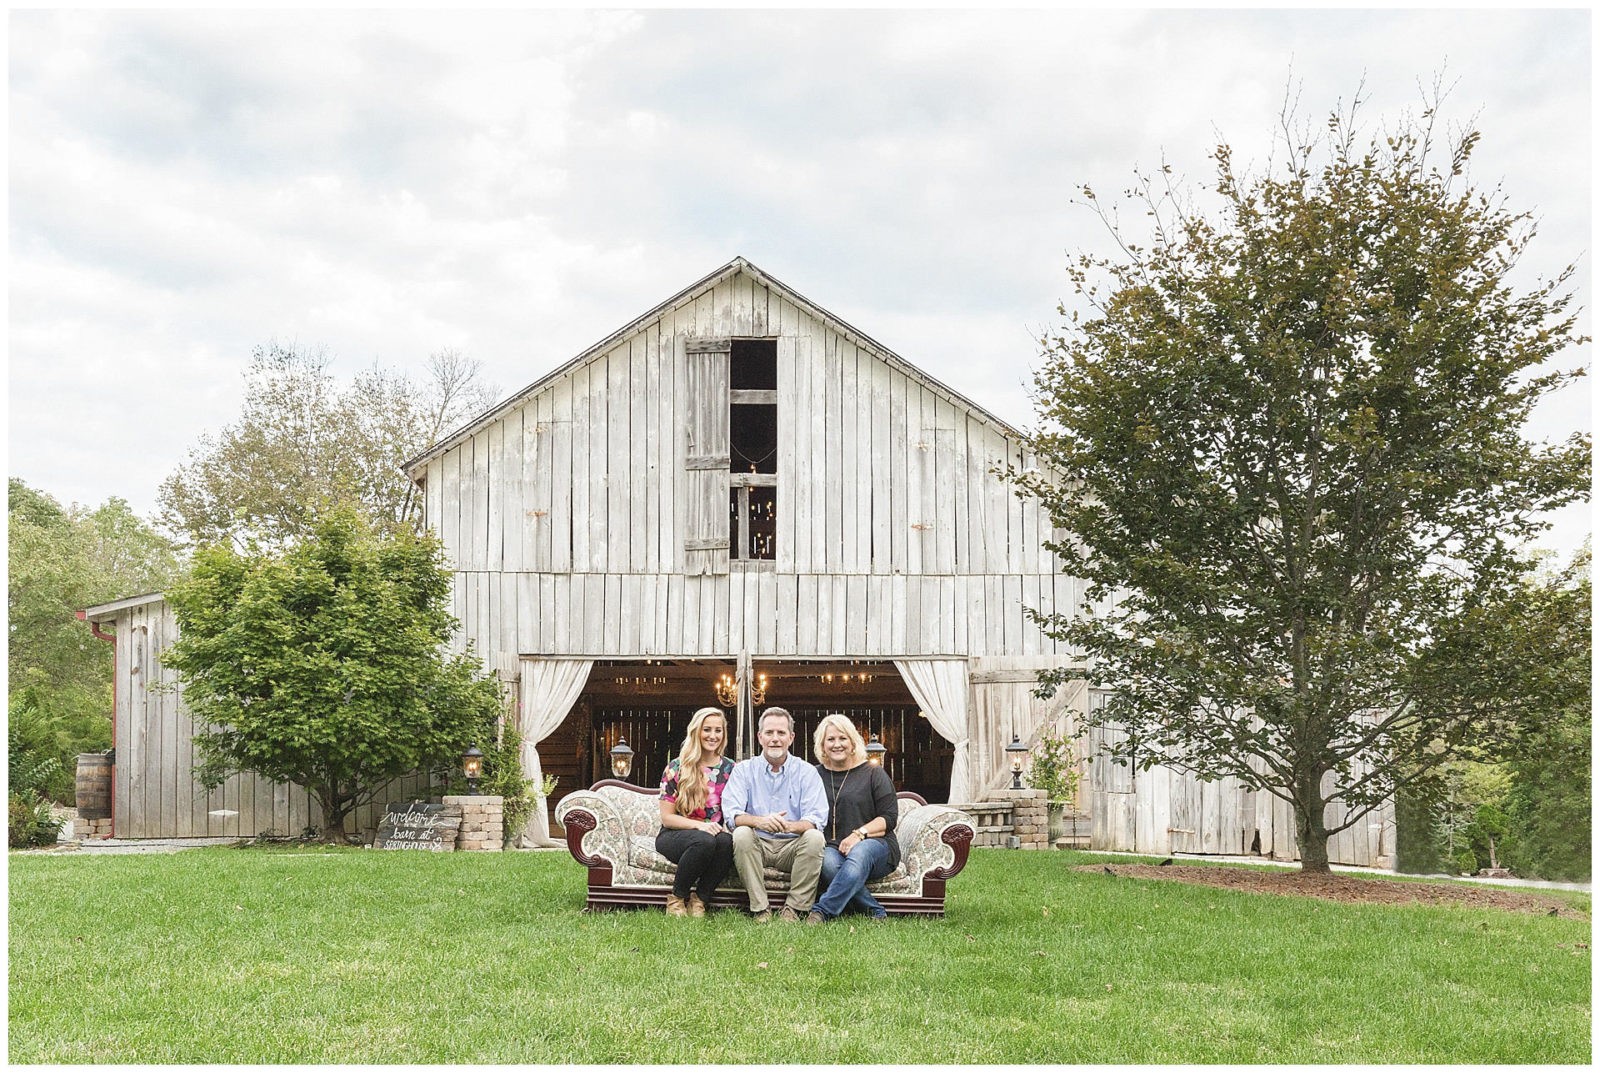 Owners of the Barn at Springhouse Gardens Wedding Venue in Nicholasville, KY